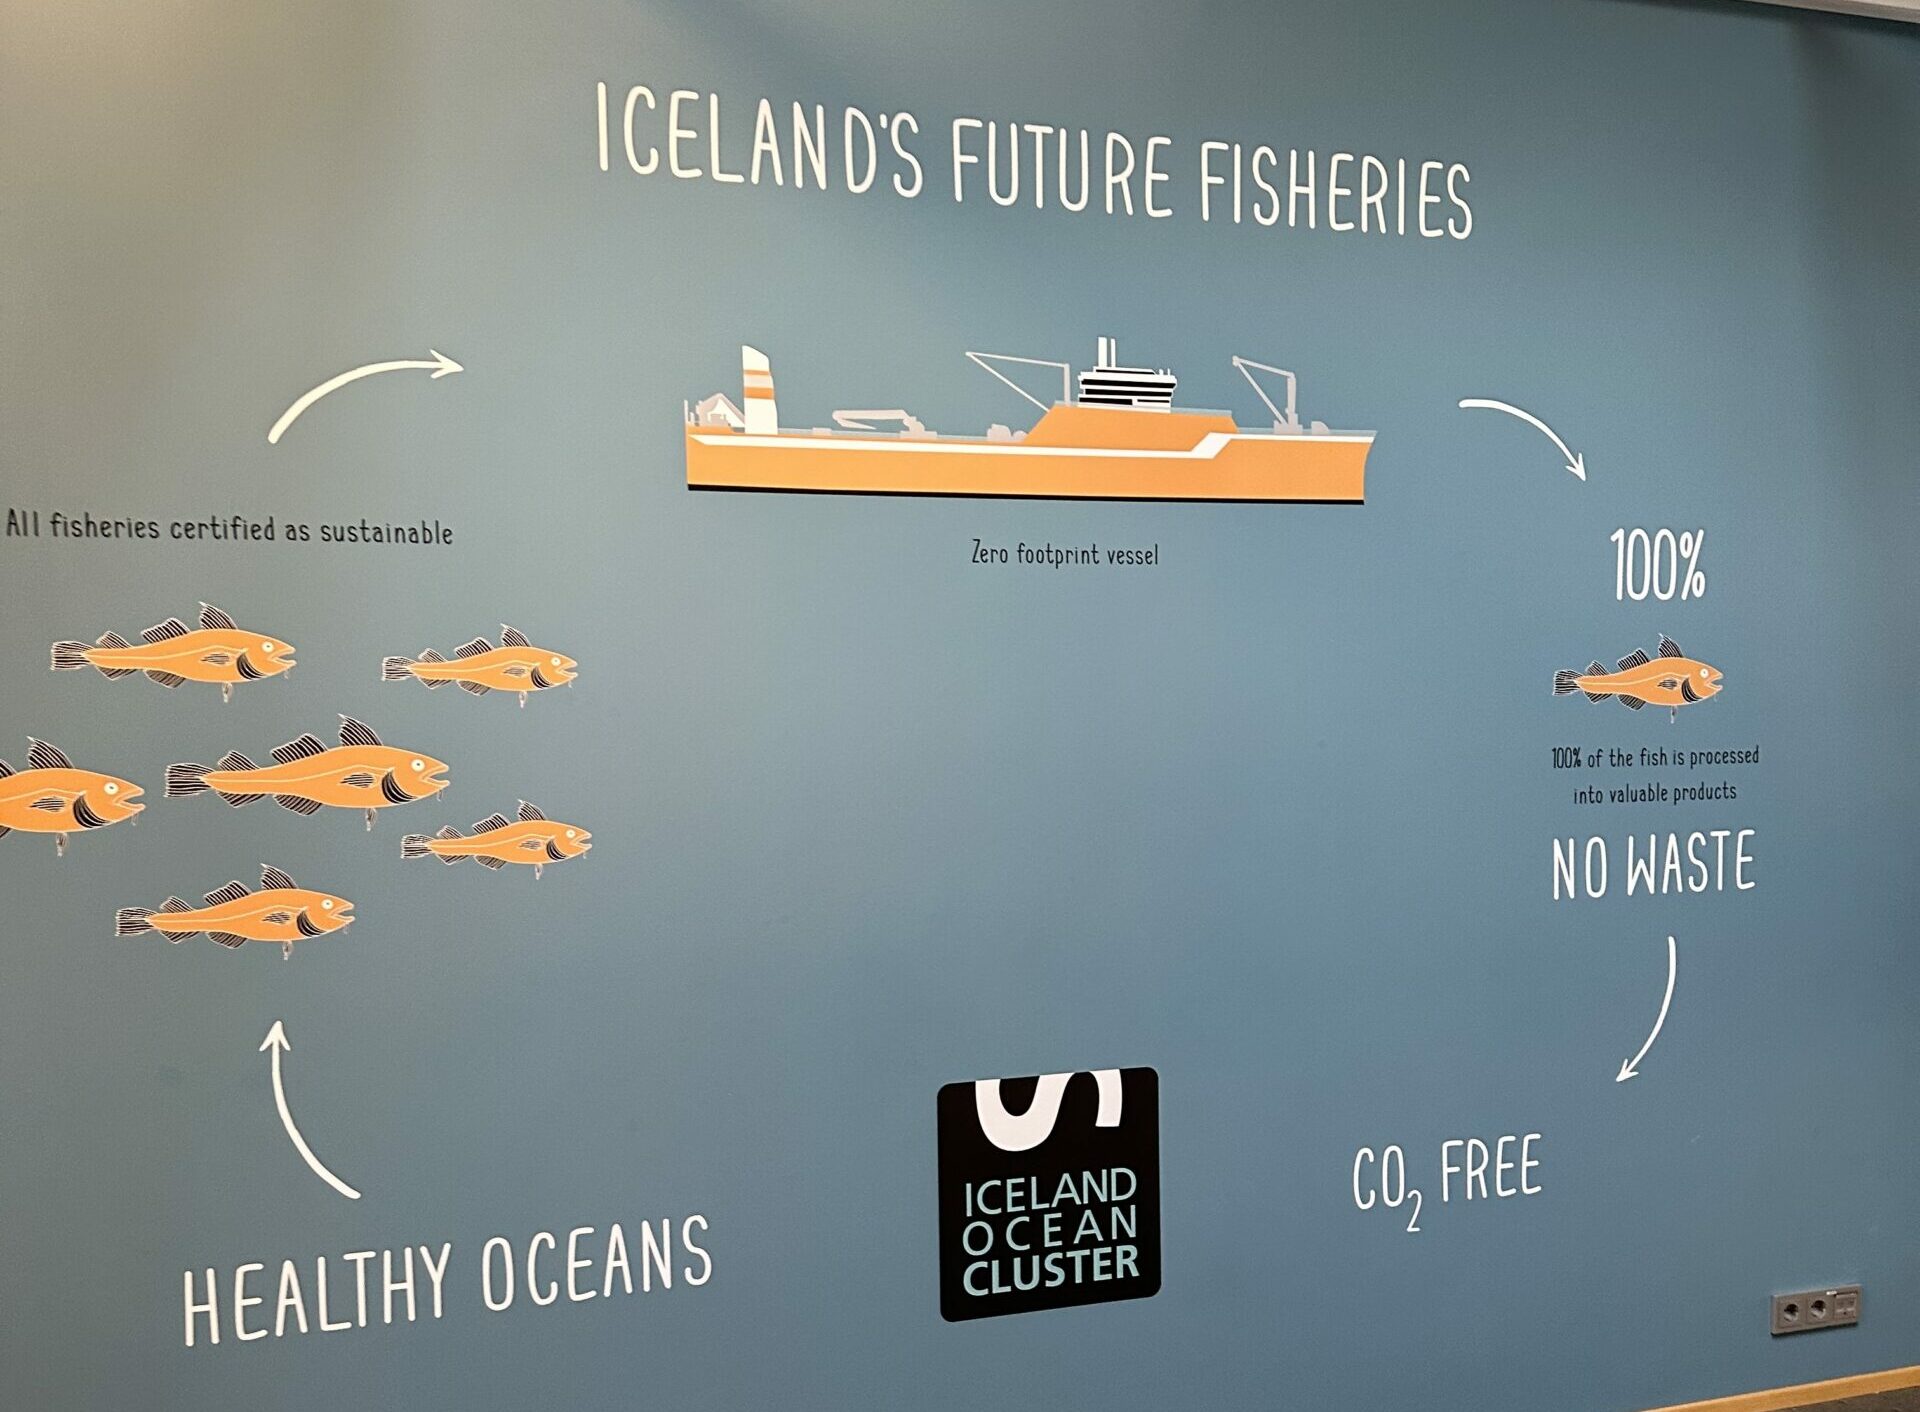 Iceland Future Fisheries photo property of Jacob Givens - Biofriendly